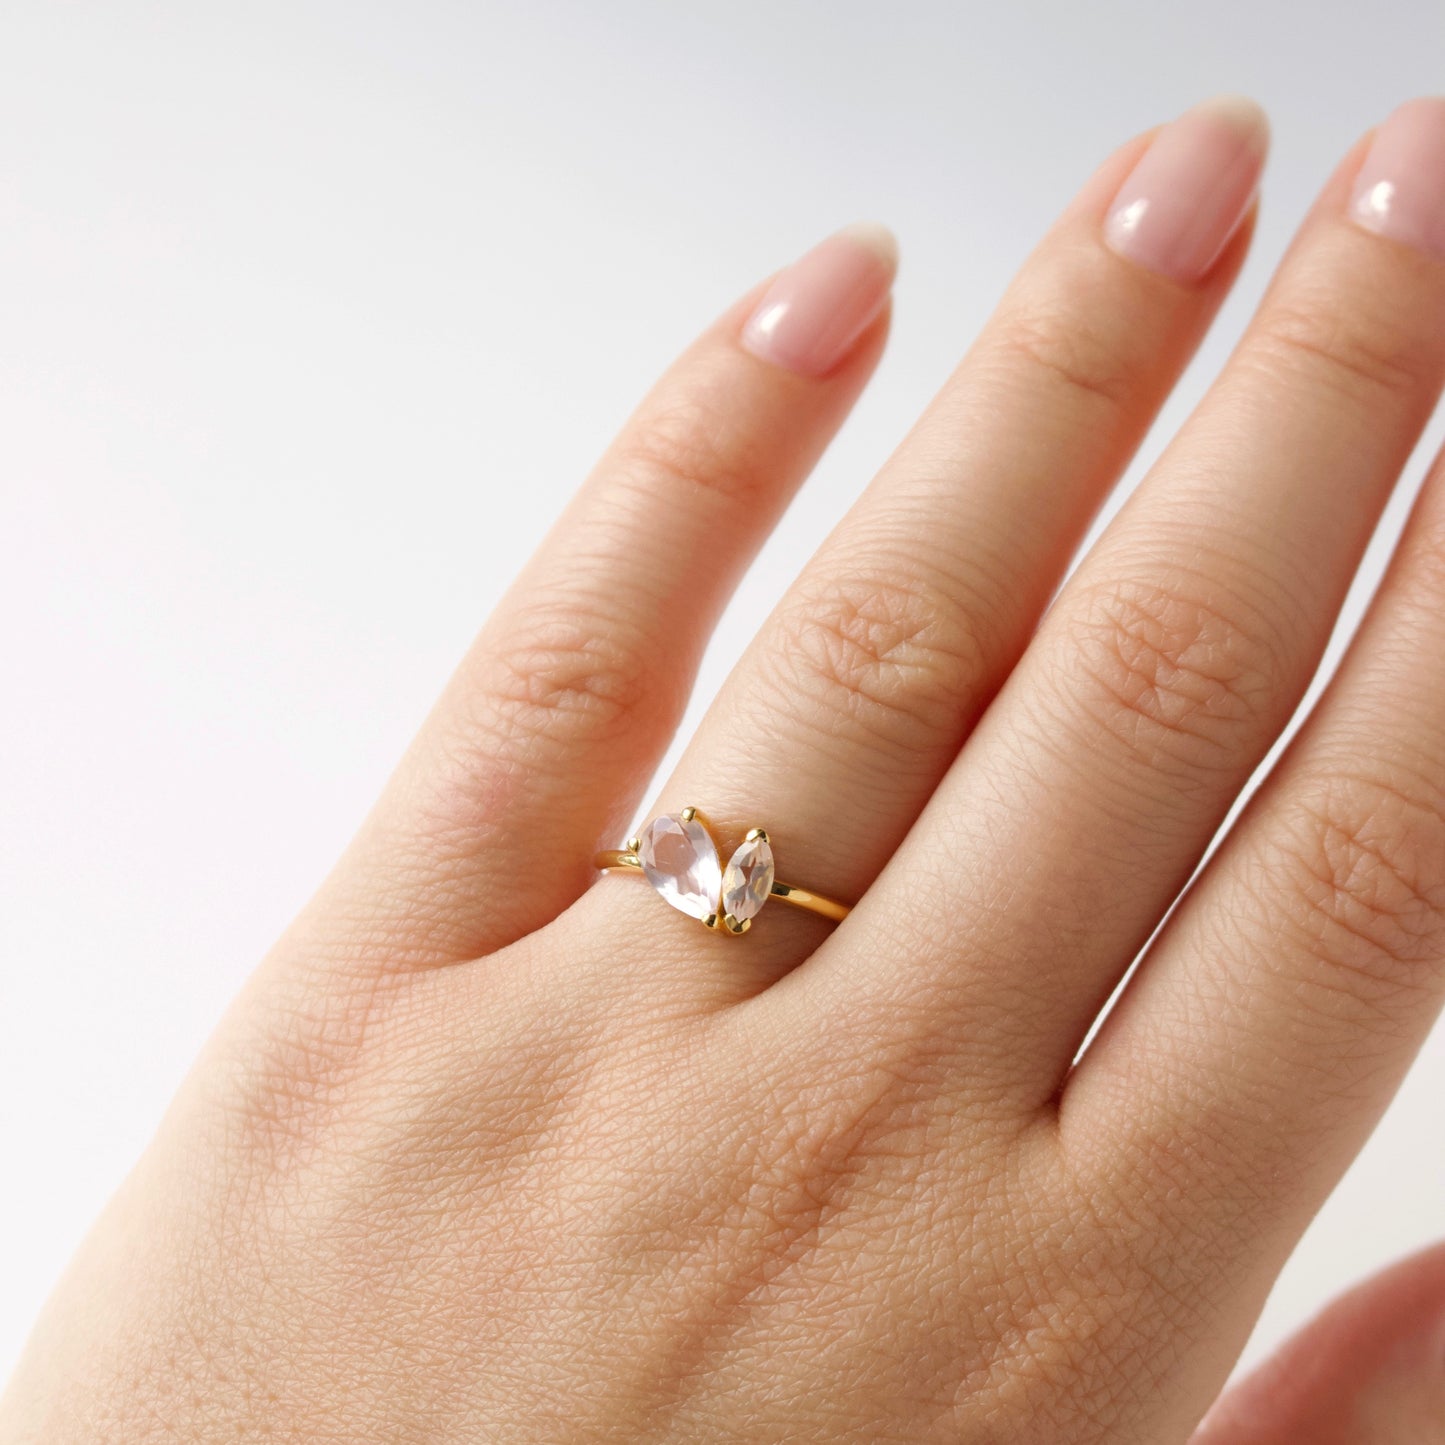 Zoe sugg intentions rose quartz love ring in gold